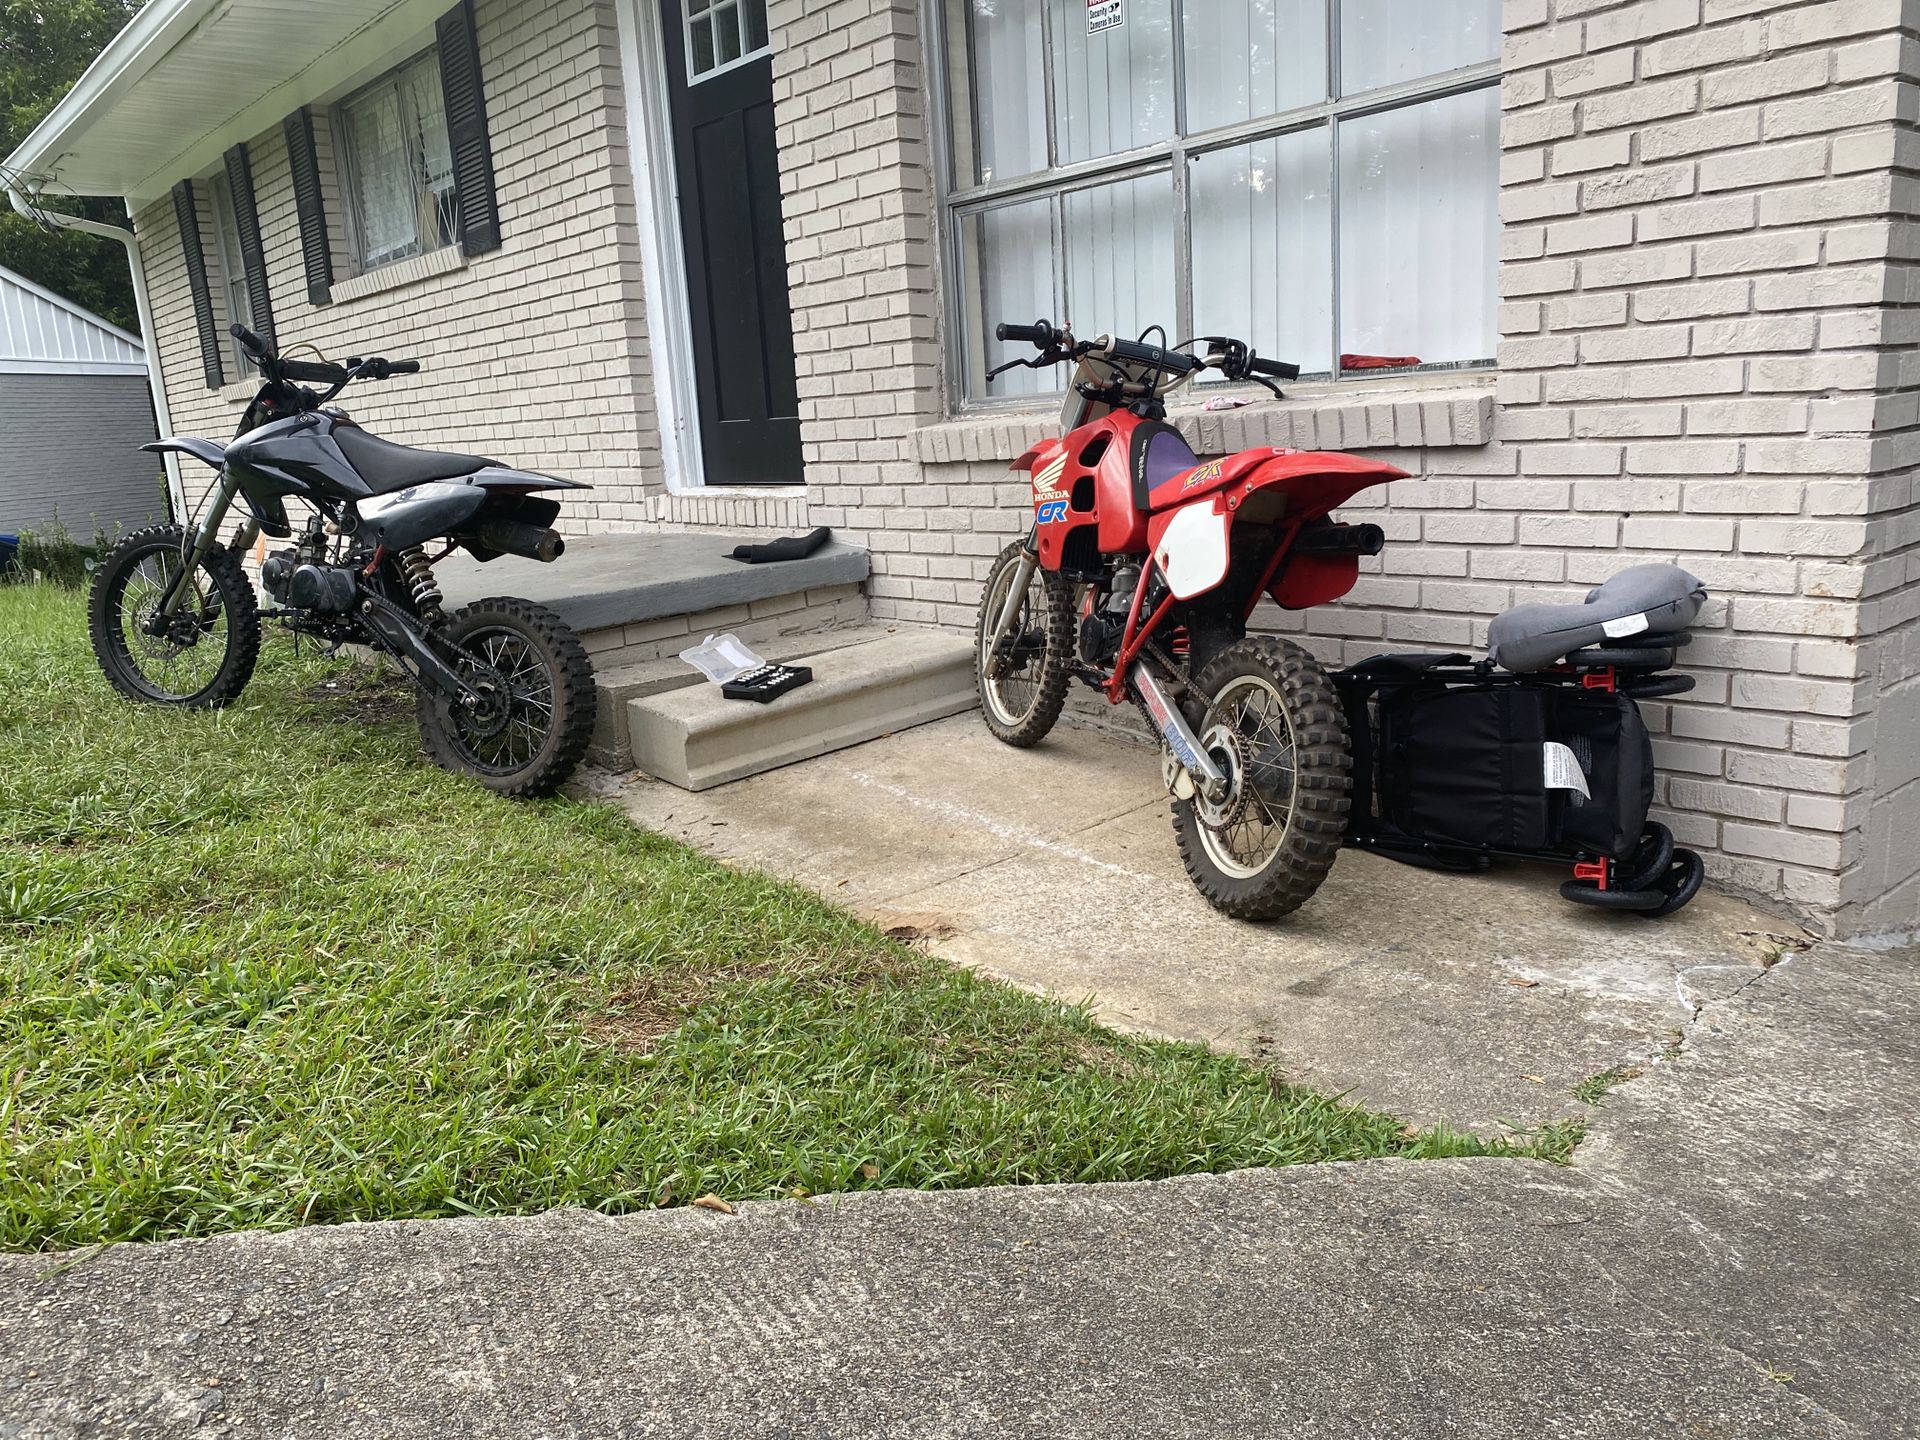 Two Dirtbikes For Price Of One! 1989 cr80 &Apollo 125cc Pitbike